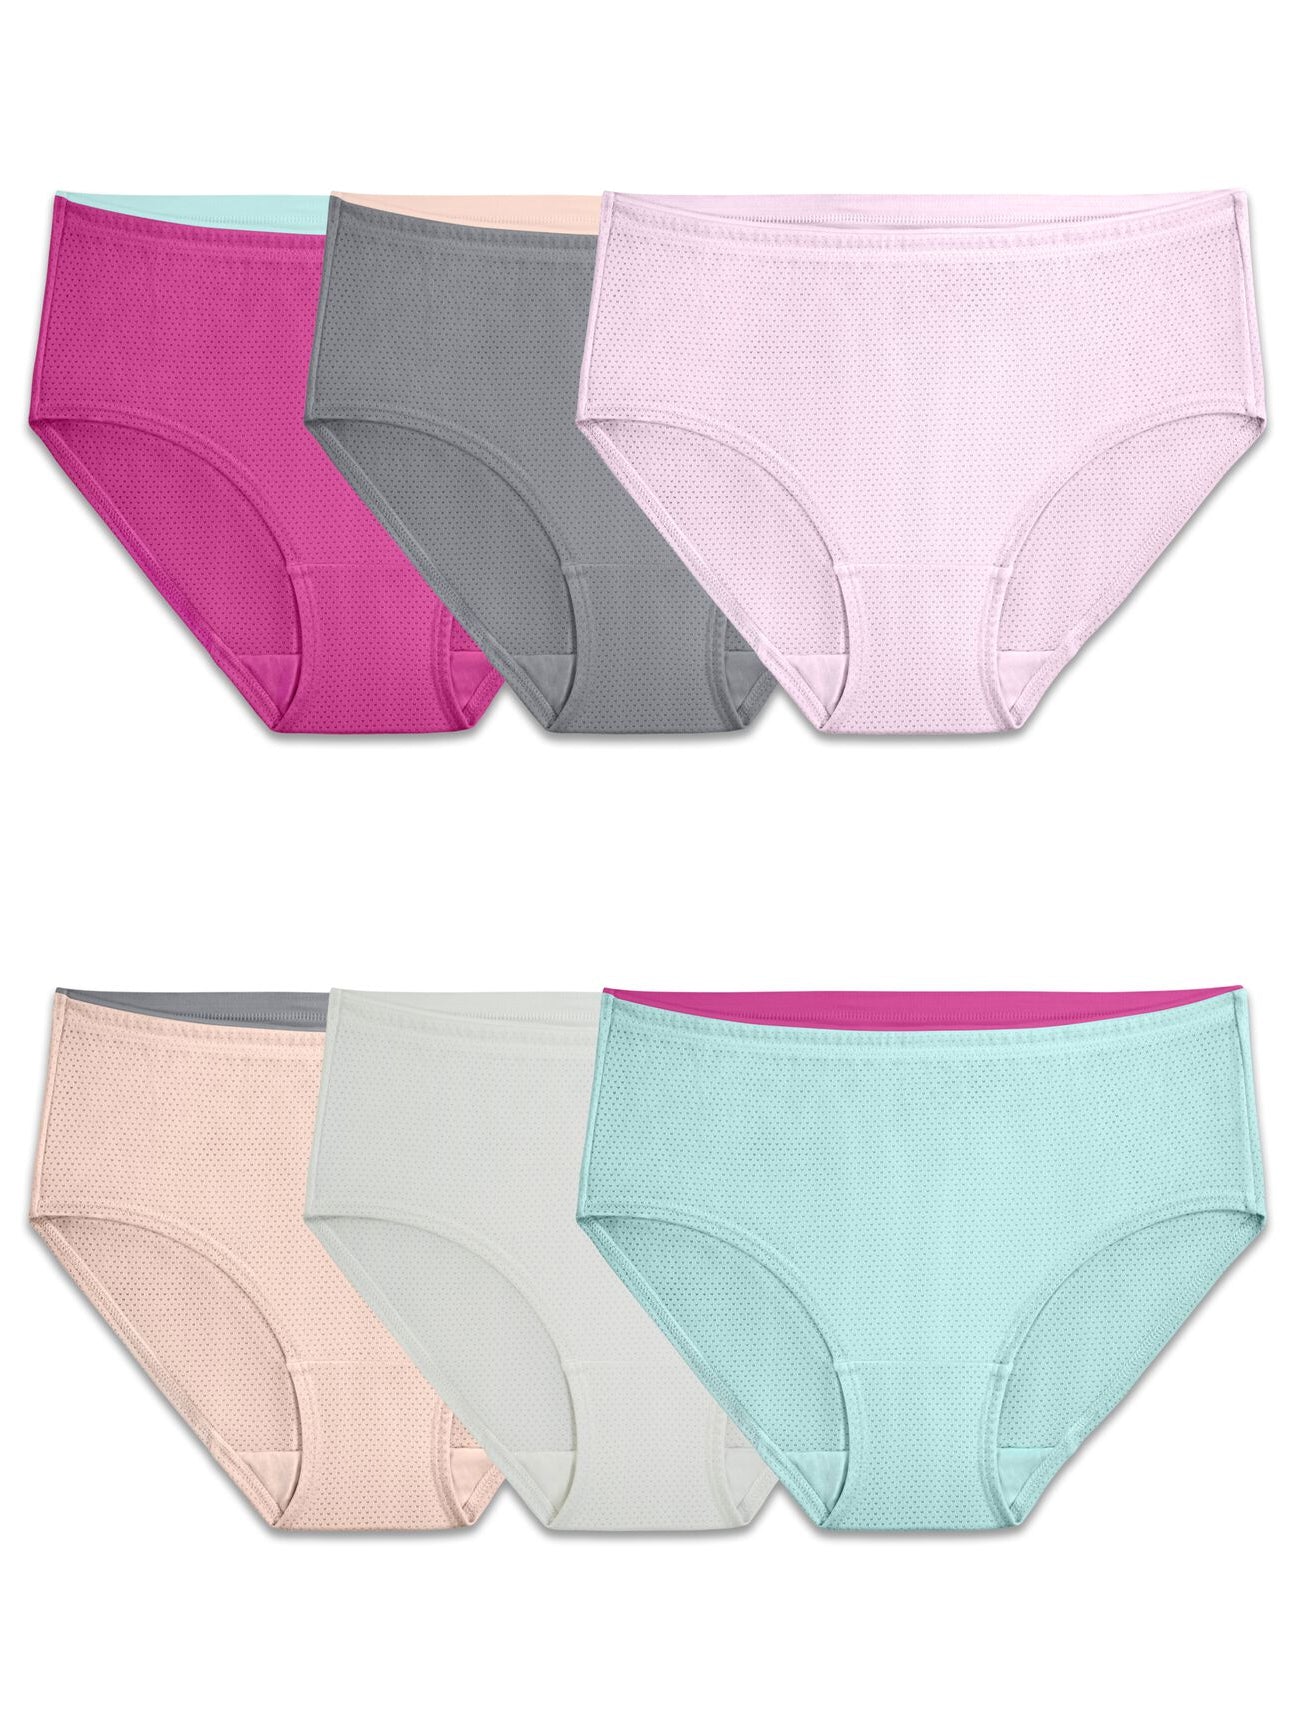  Meshal Invisible Soft Cotton Panties Women's Breathable Seamless  Thong 6 Pack (802,Large) : Clothing, Shoes & Jewelry